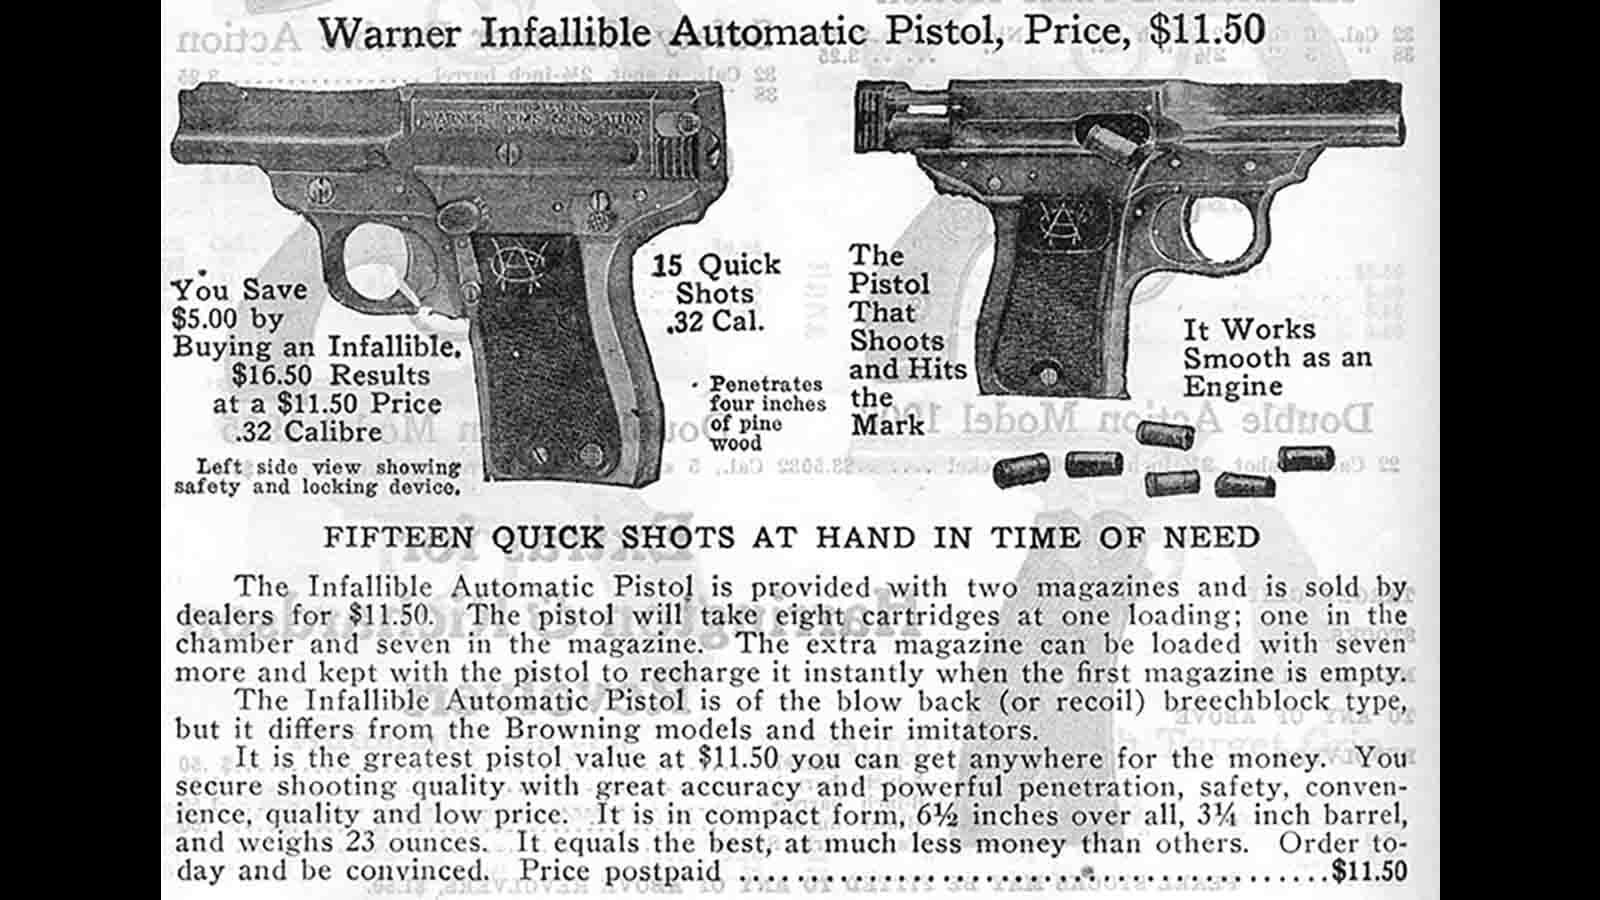 A vintage advertisement in the 1918 Kirtland Bros. catalogue for the Warner Infallible automatic pistol. At the time, it cost $11.50.